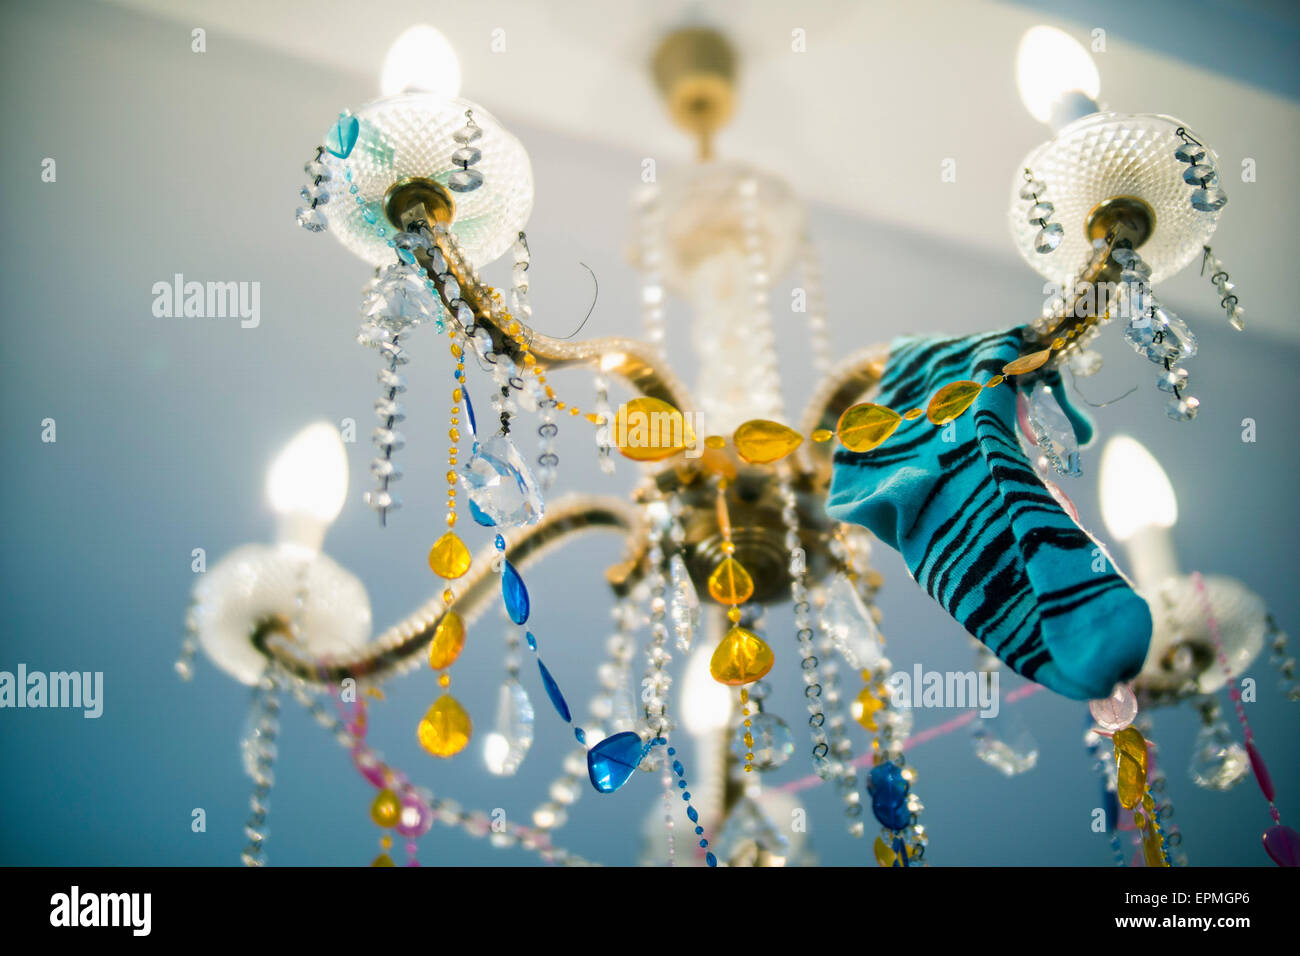 Sock hanging on chandelier after a party Stock Photo